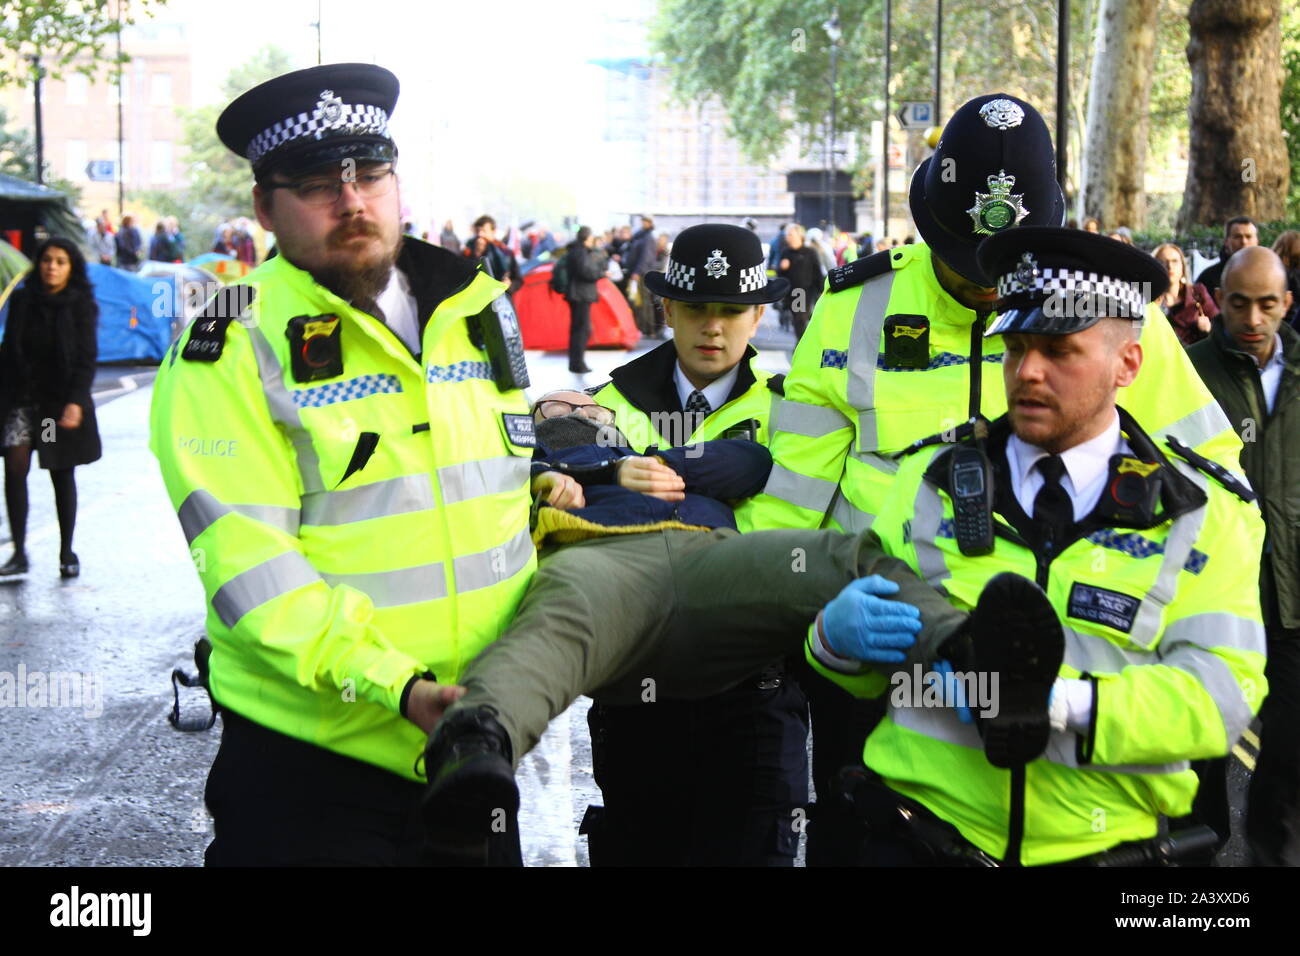 Police arrest a protester at the Extinction Rebellion camping demo in central London on 8th October 2019. Stock Photo